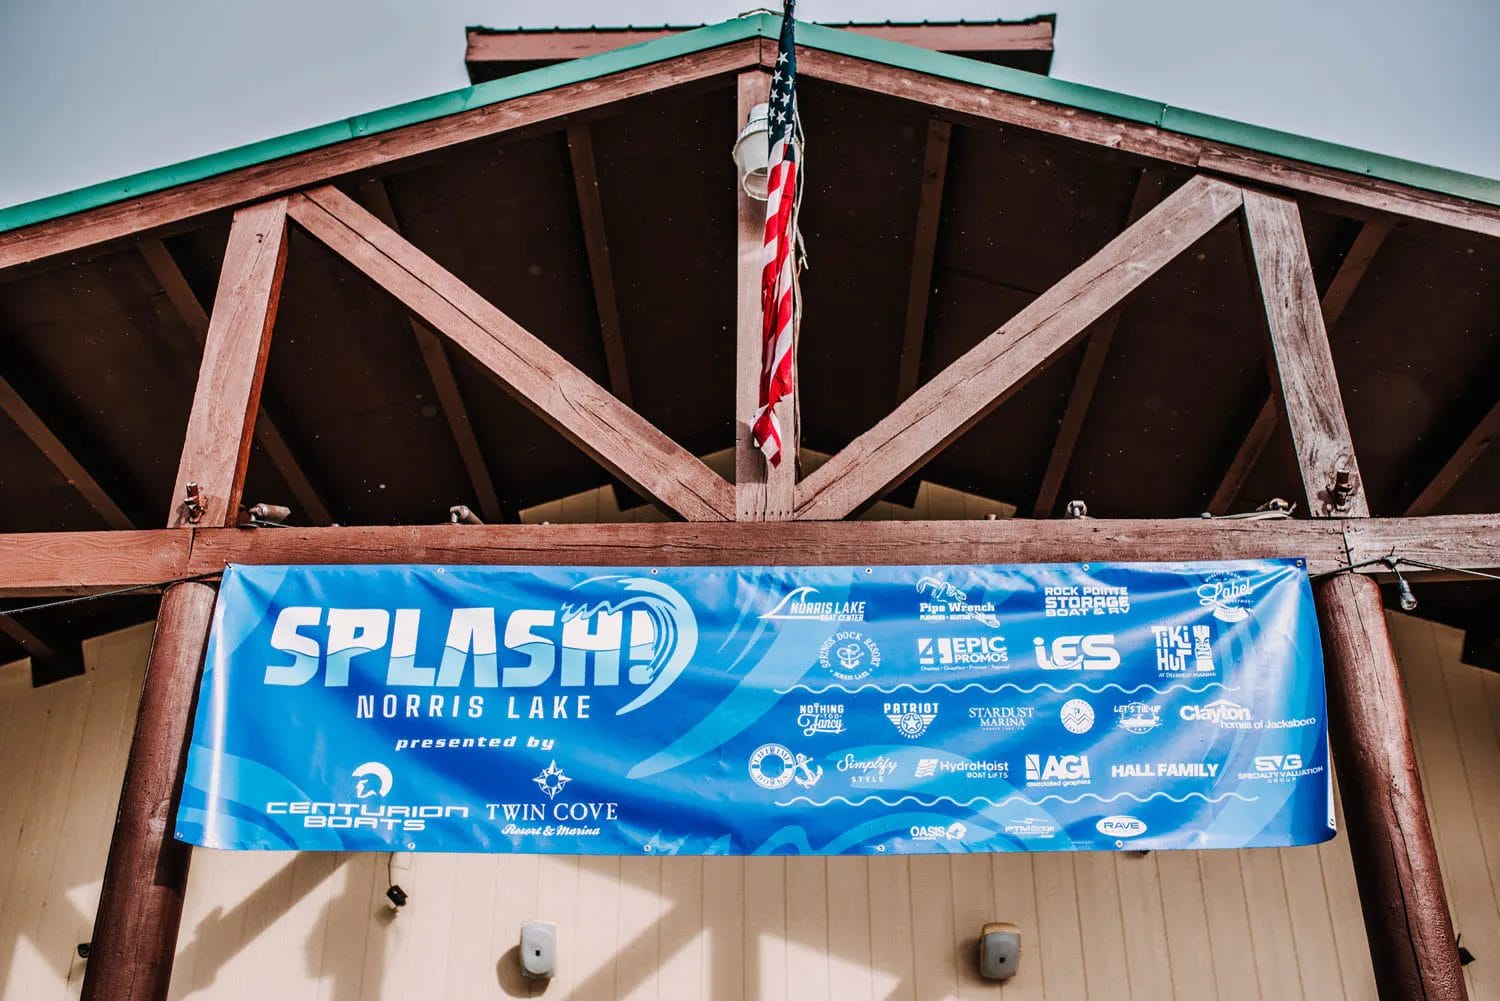 A blue banner with the word "splash" on it for wakesurf board riders.